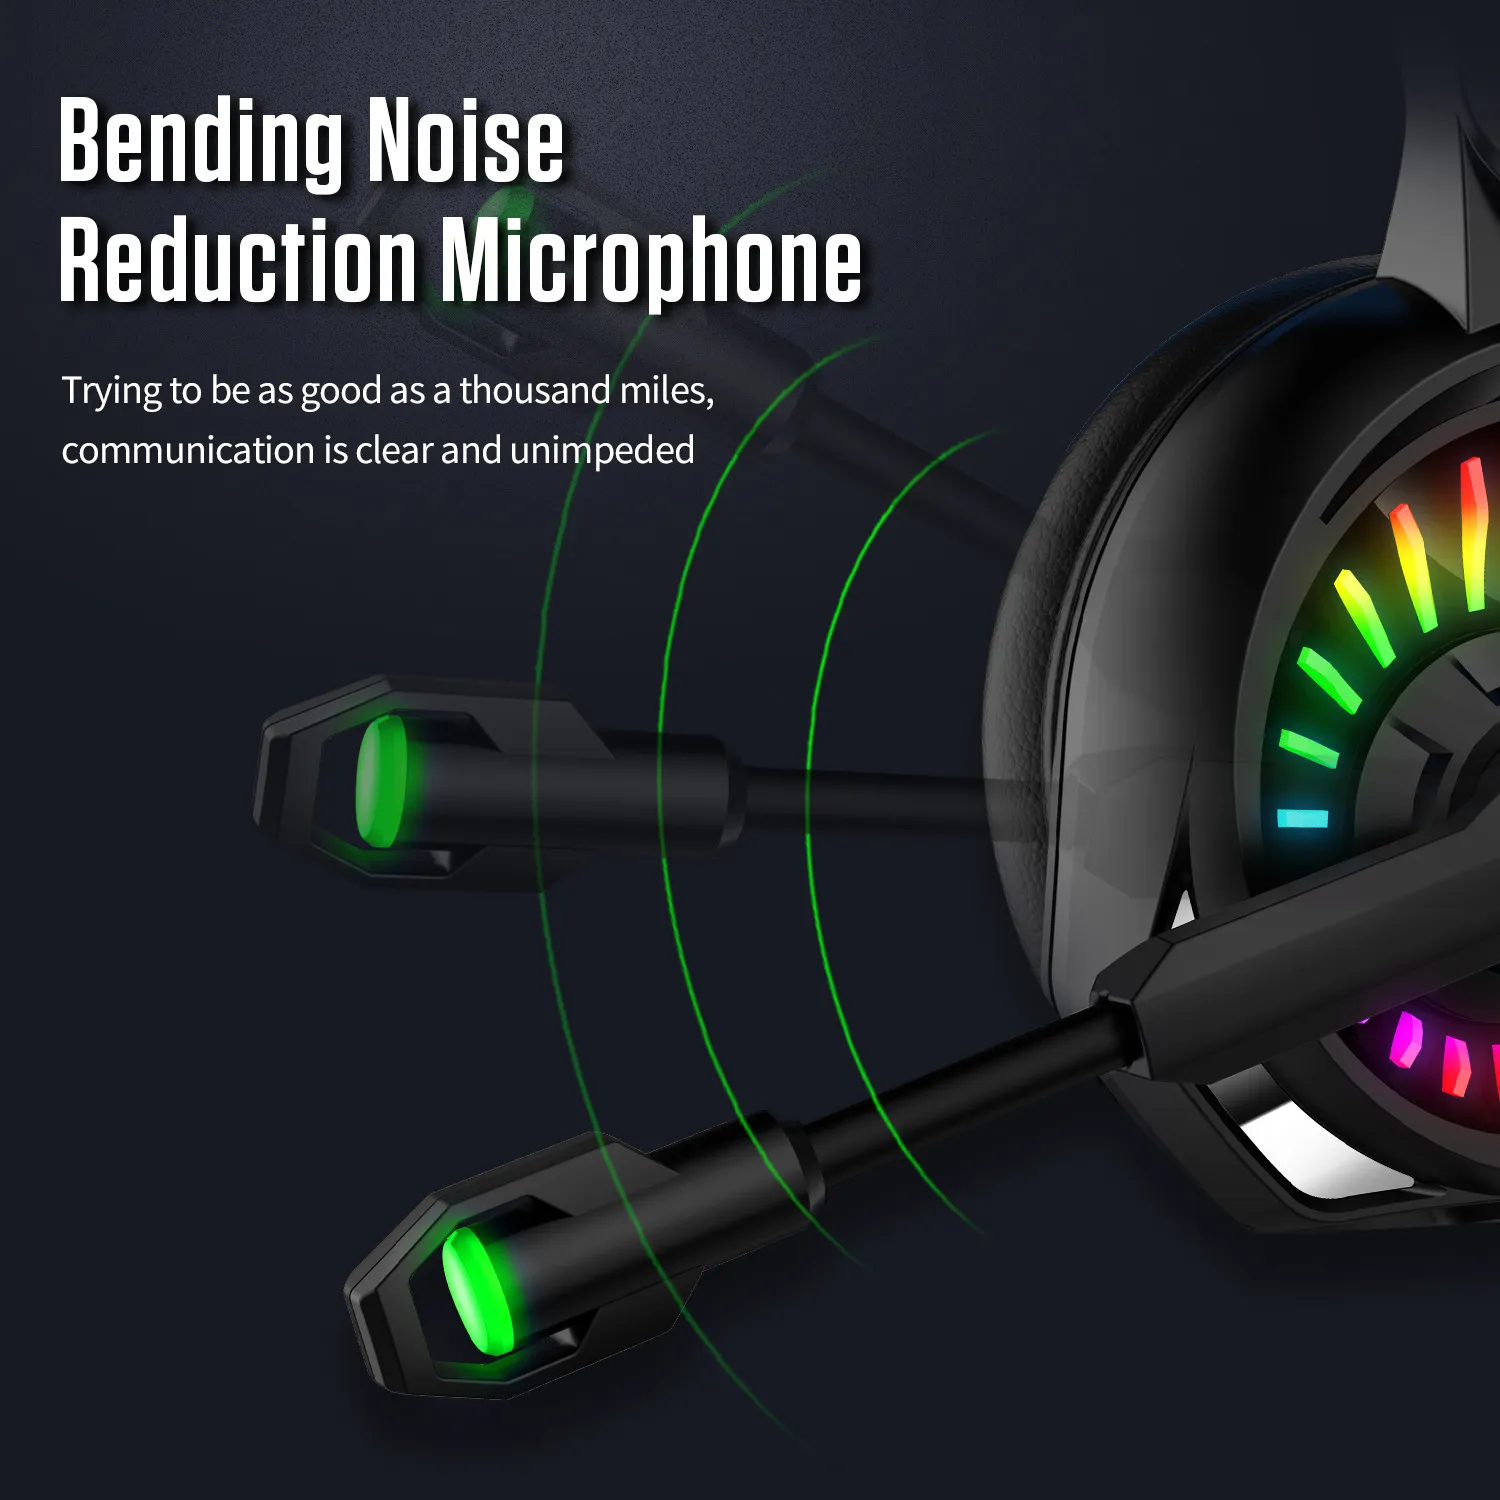 Luminous LED Headphones With Microphone For PS4 Gaming 4D Stereo RGB  Marquee Gaming Earphones With Mic For Xbox One/Laptop/Computer/Tablet Gamers  Model A20 From Senden, $15.29